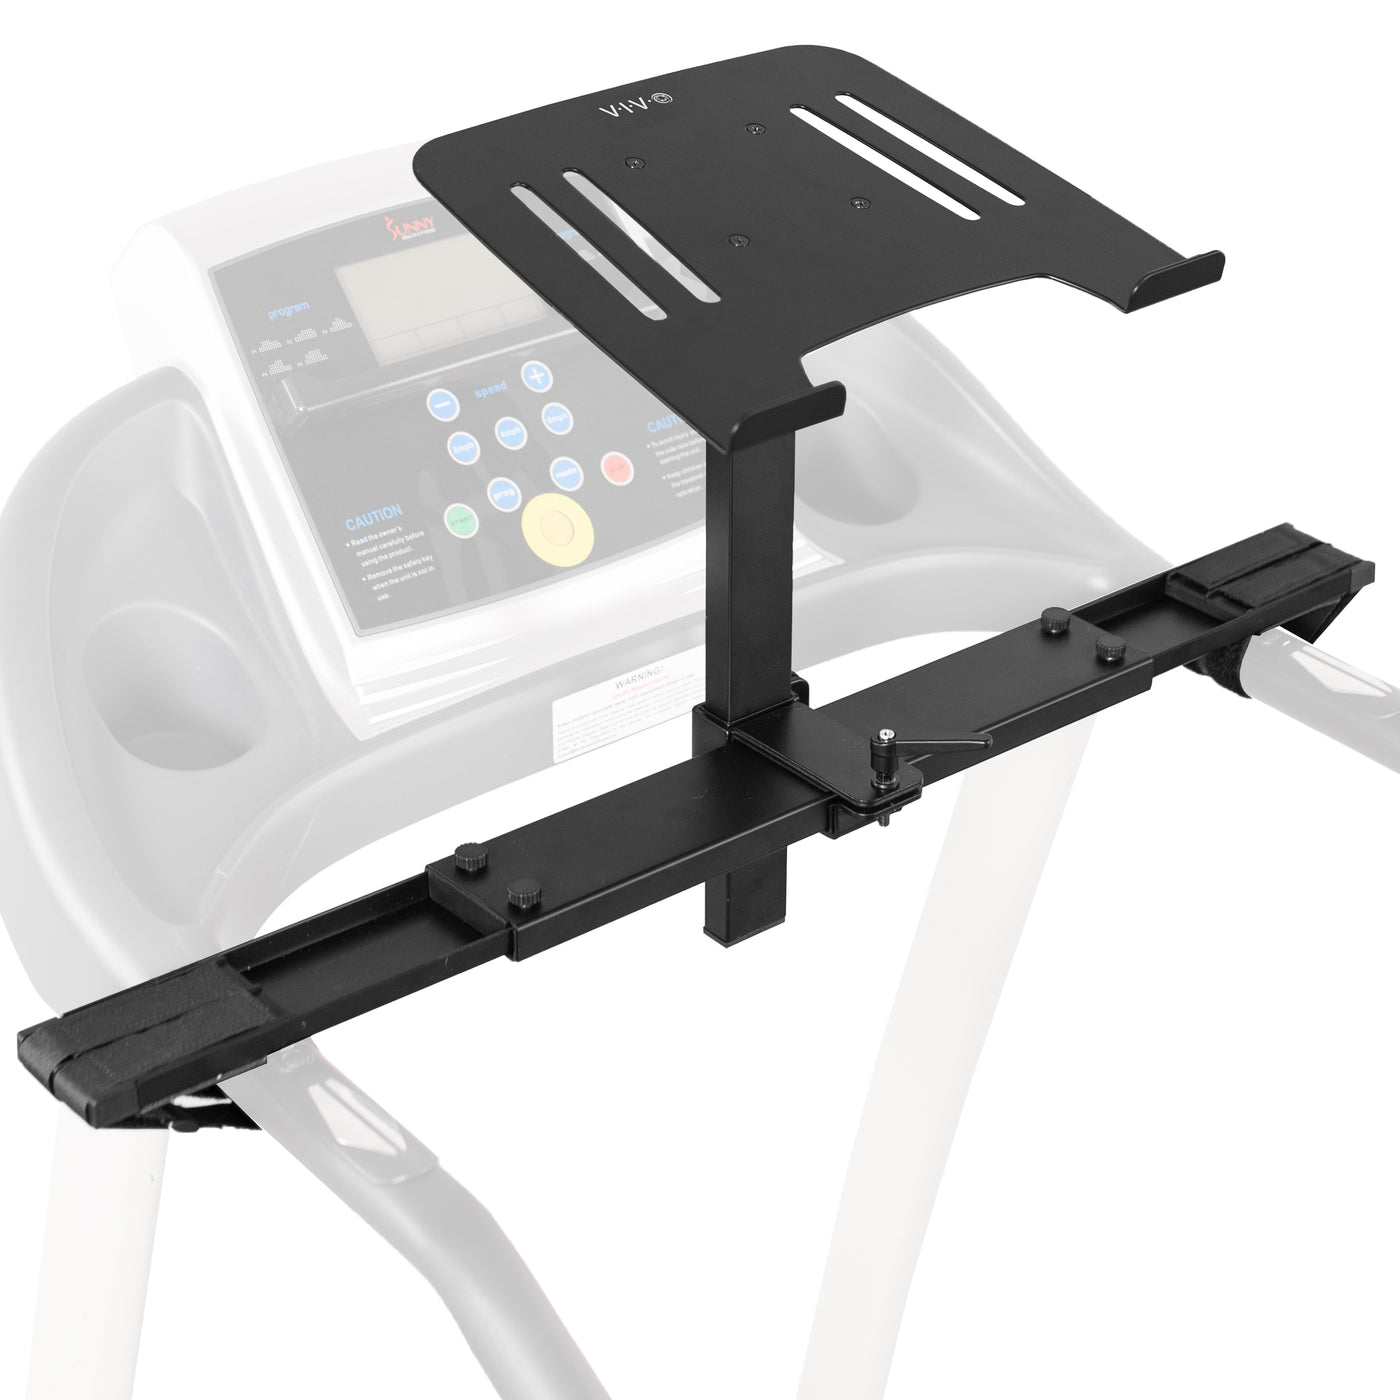 Sturdy height adjustable laptop tray attachment for stable treadmill workstation.